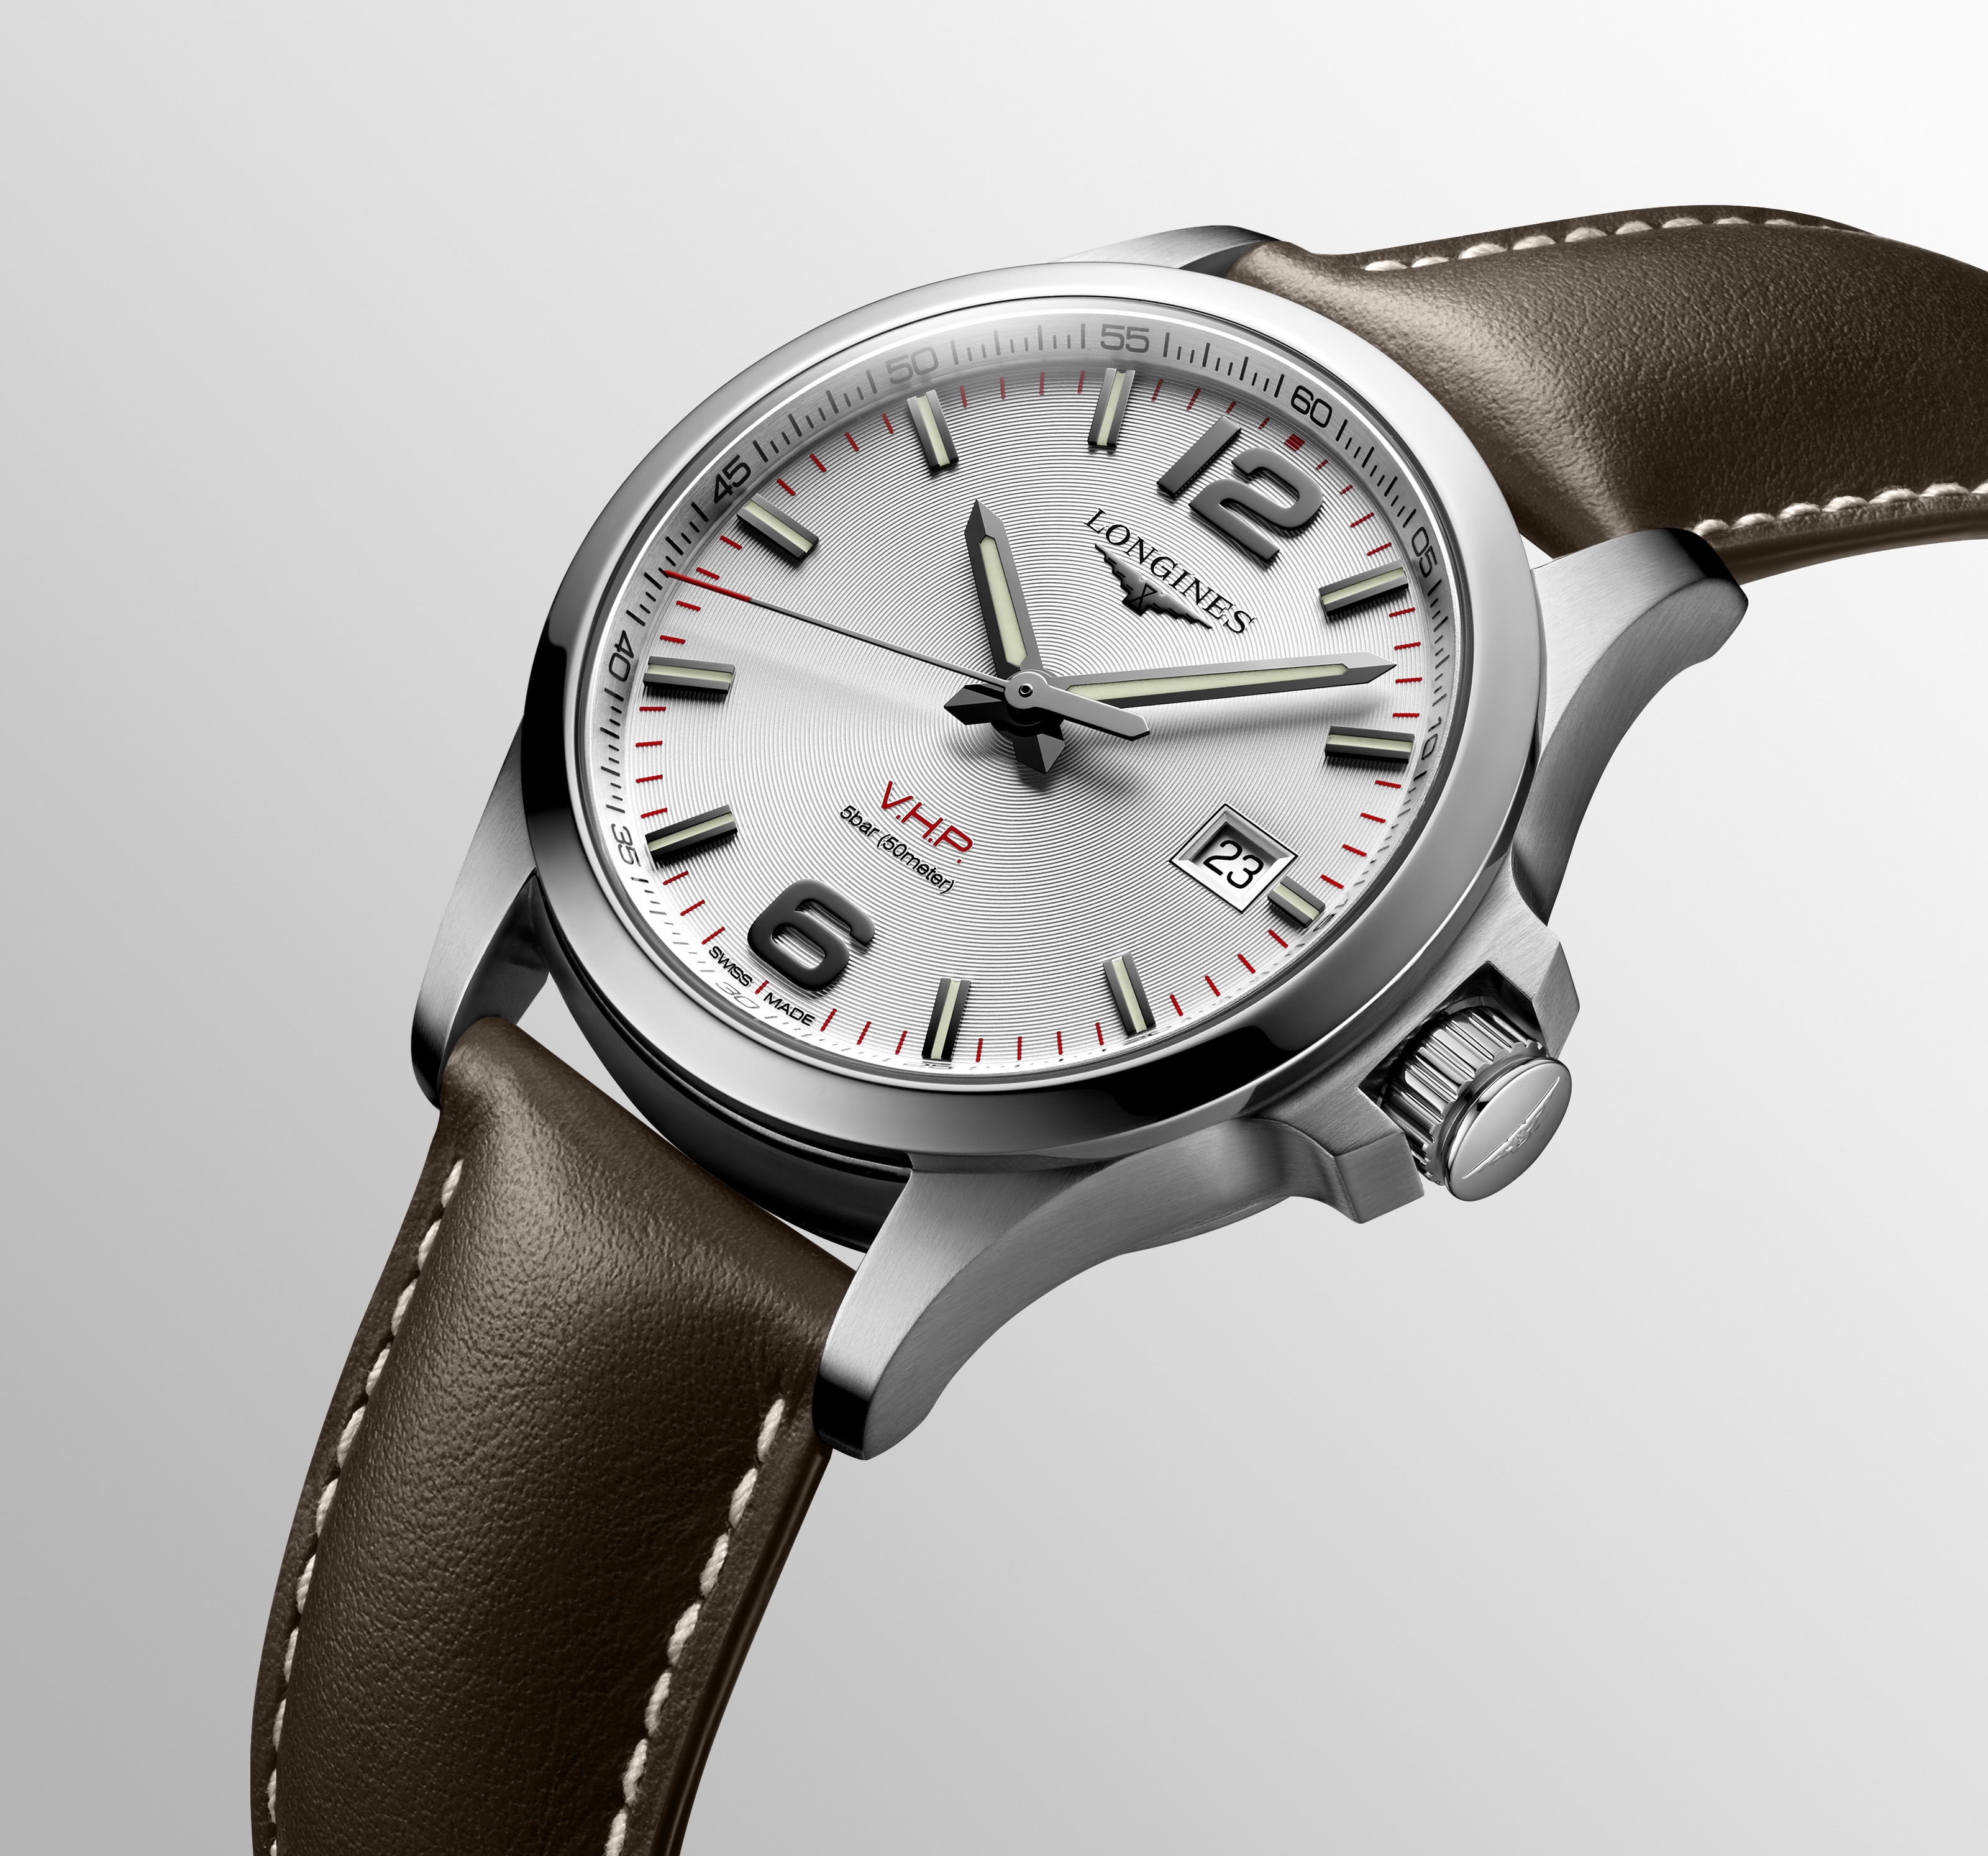 The Longines Conquest V.H.P. Collection now comes on a leather strap